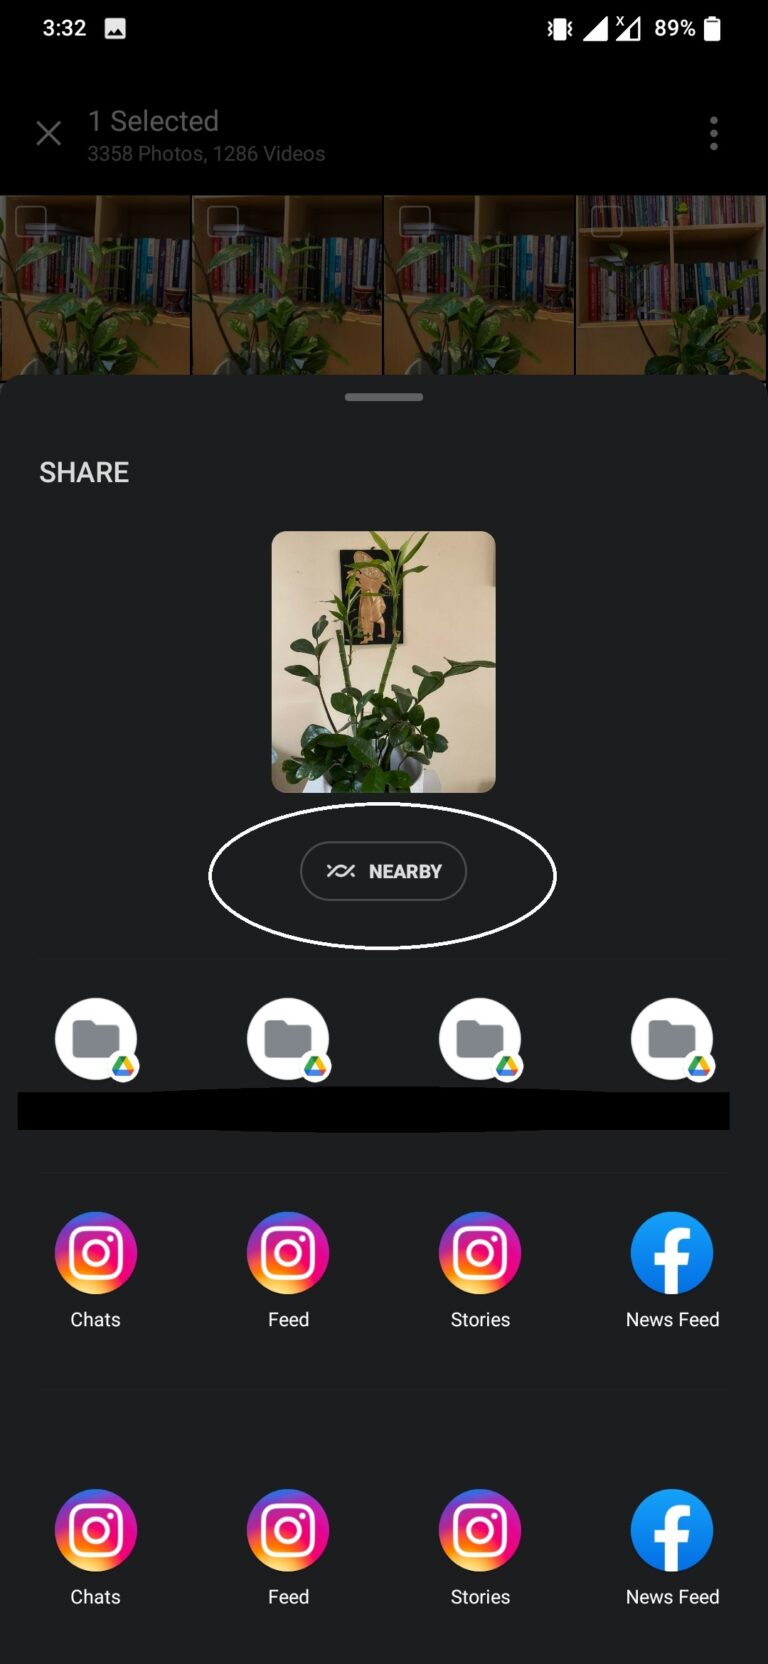 nearby share option